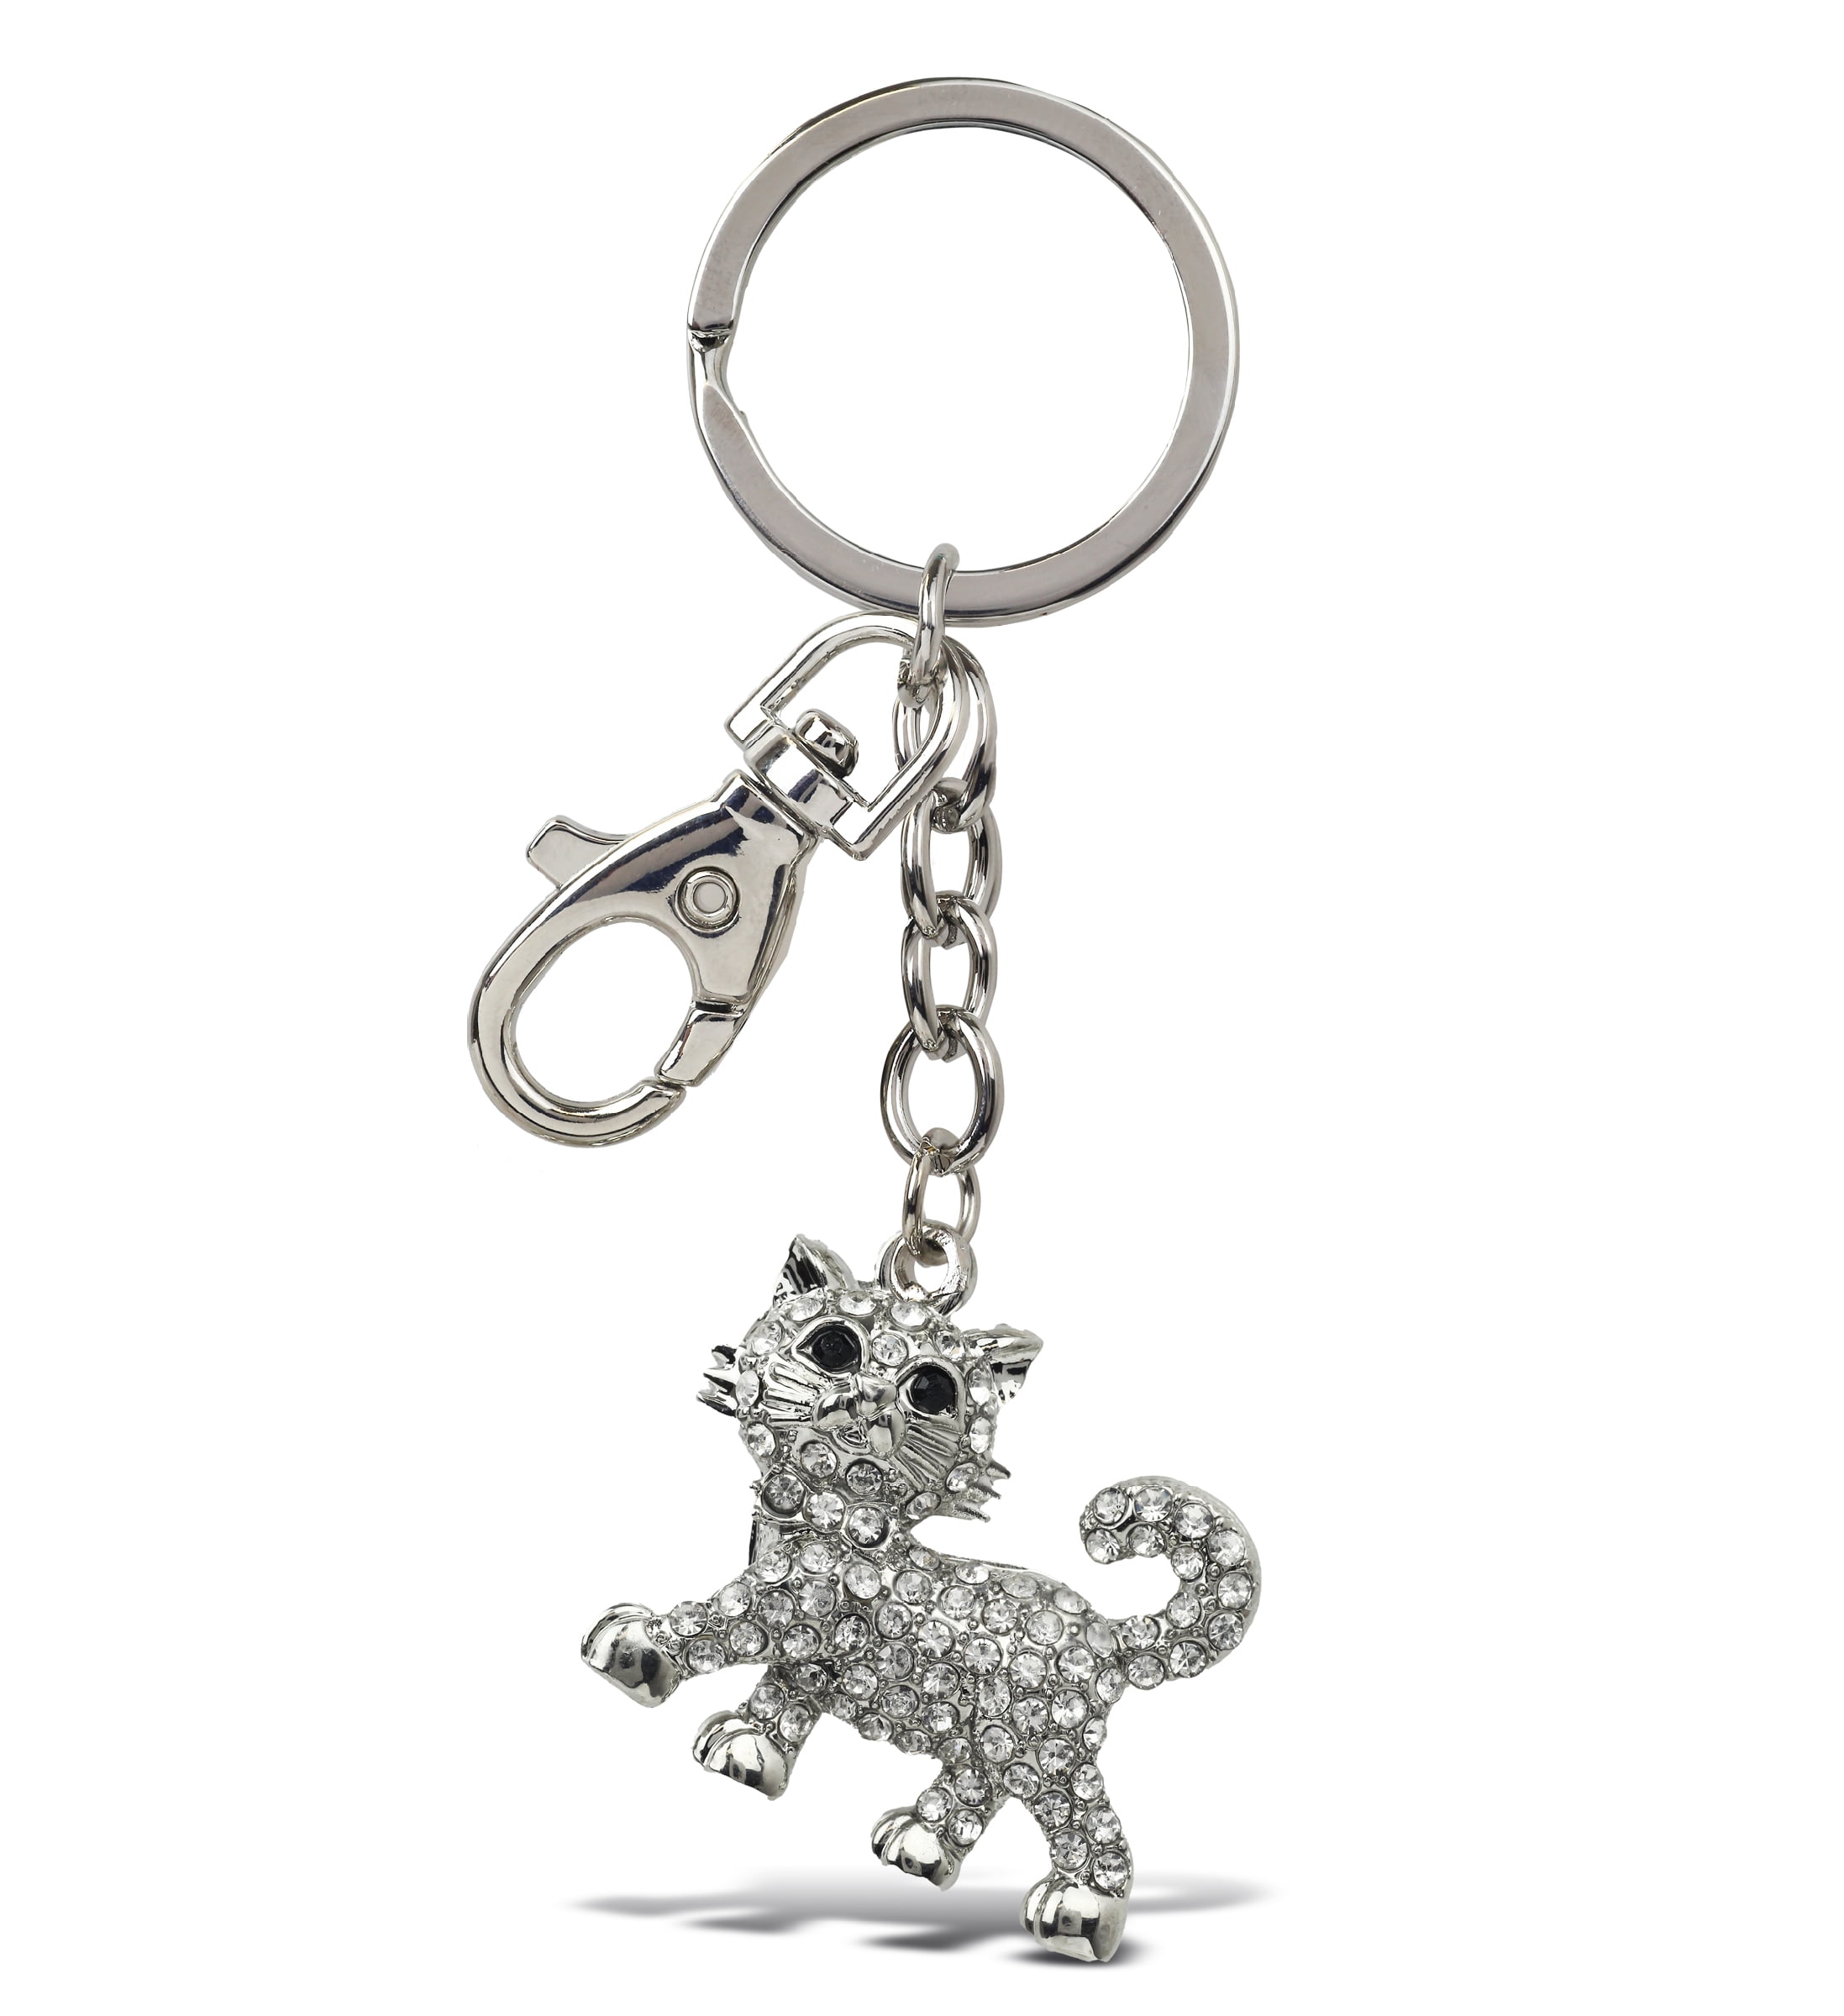 Aqua79 Cats Sparkling Silver Keychains Set of 4 – Pink, Happy